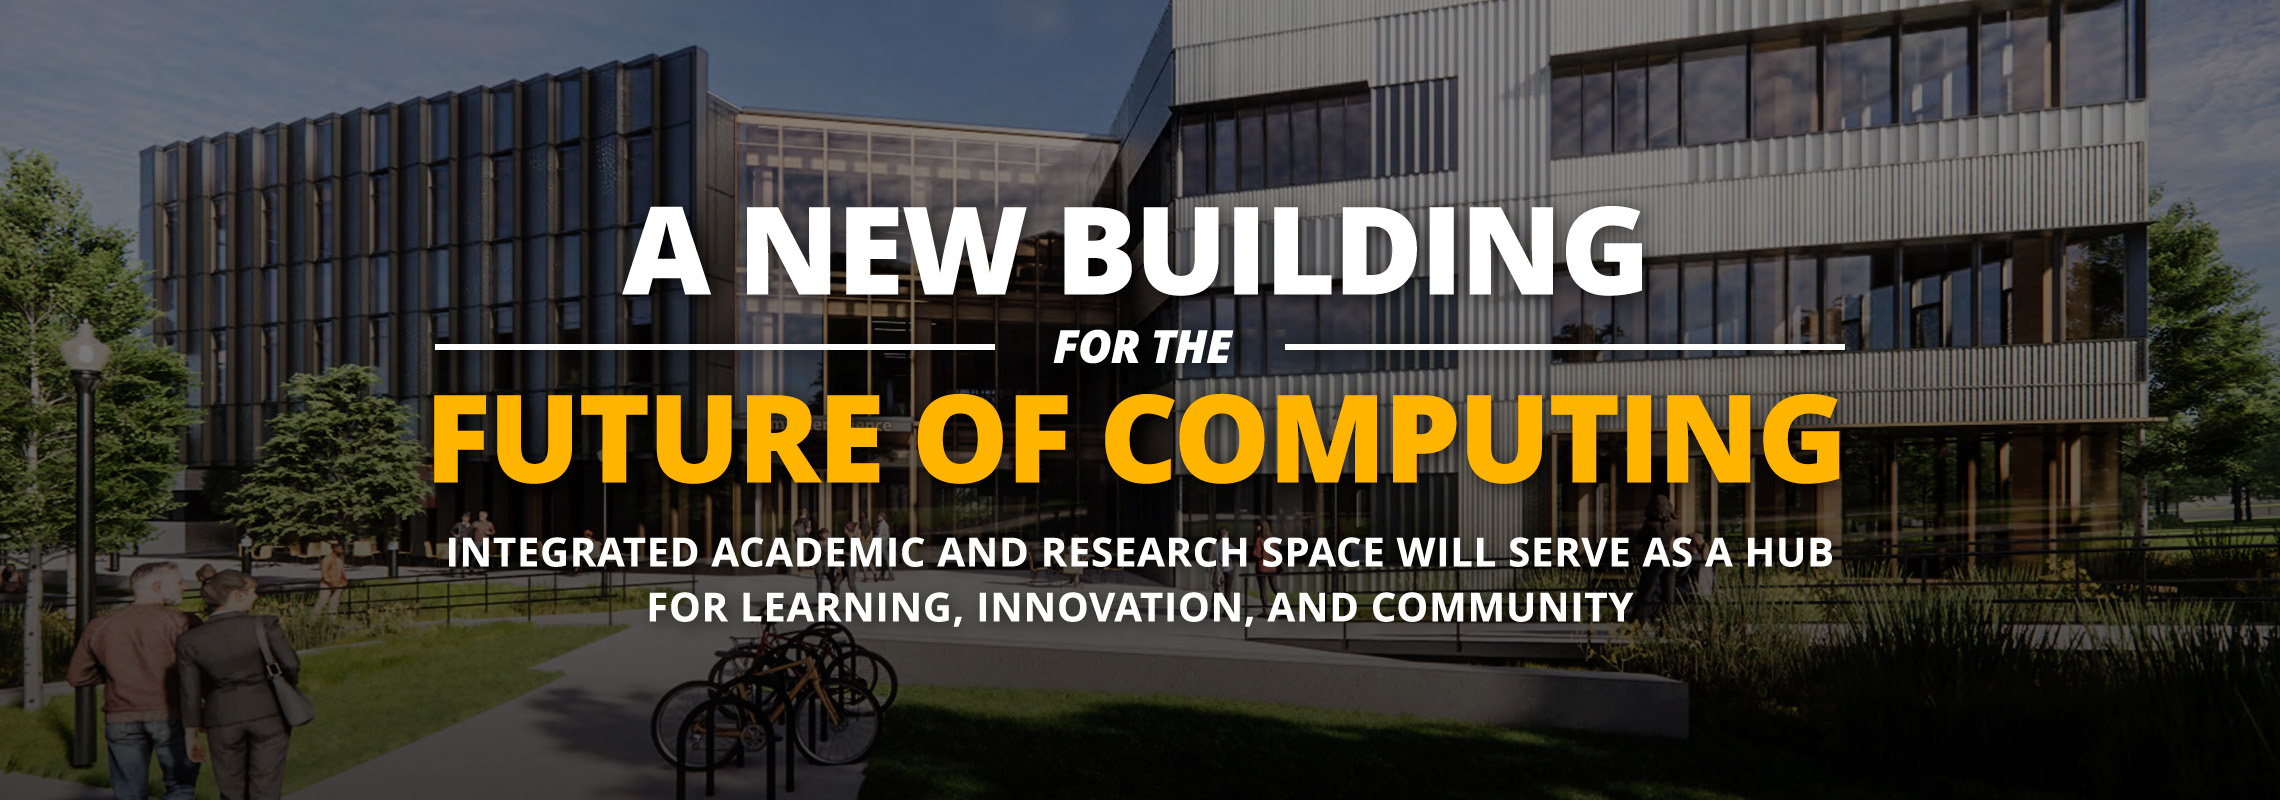 A New Building for the Future of Computing - Integrated academic and research space will serve as a hub for learning, innovation, and community